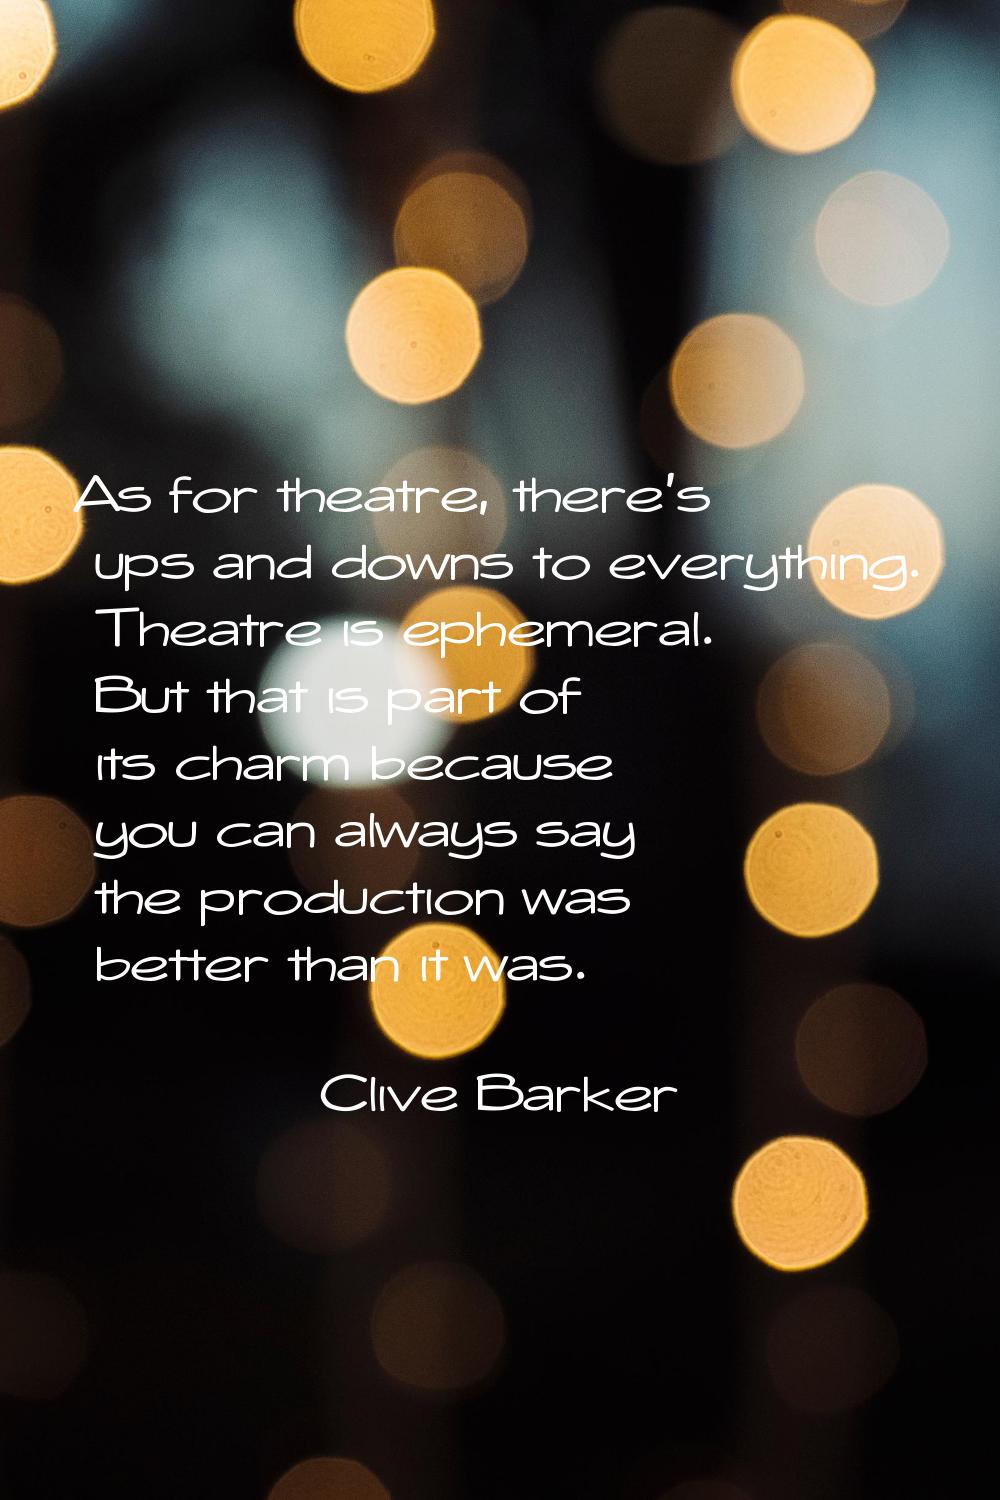 As for theatre, there's ups and downs to everything. Theatre is ephemeral. But that is part of its 